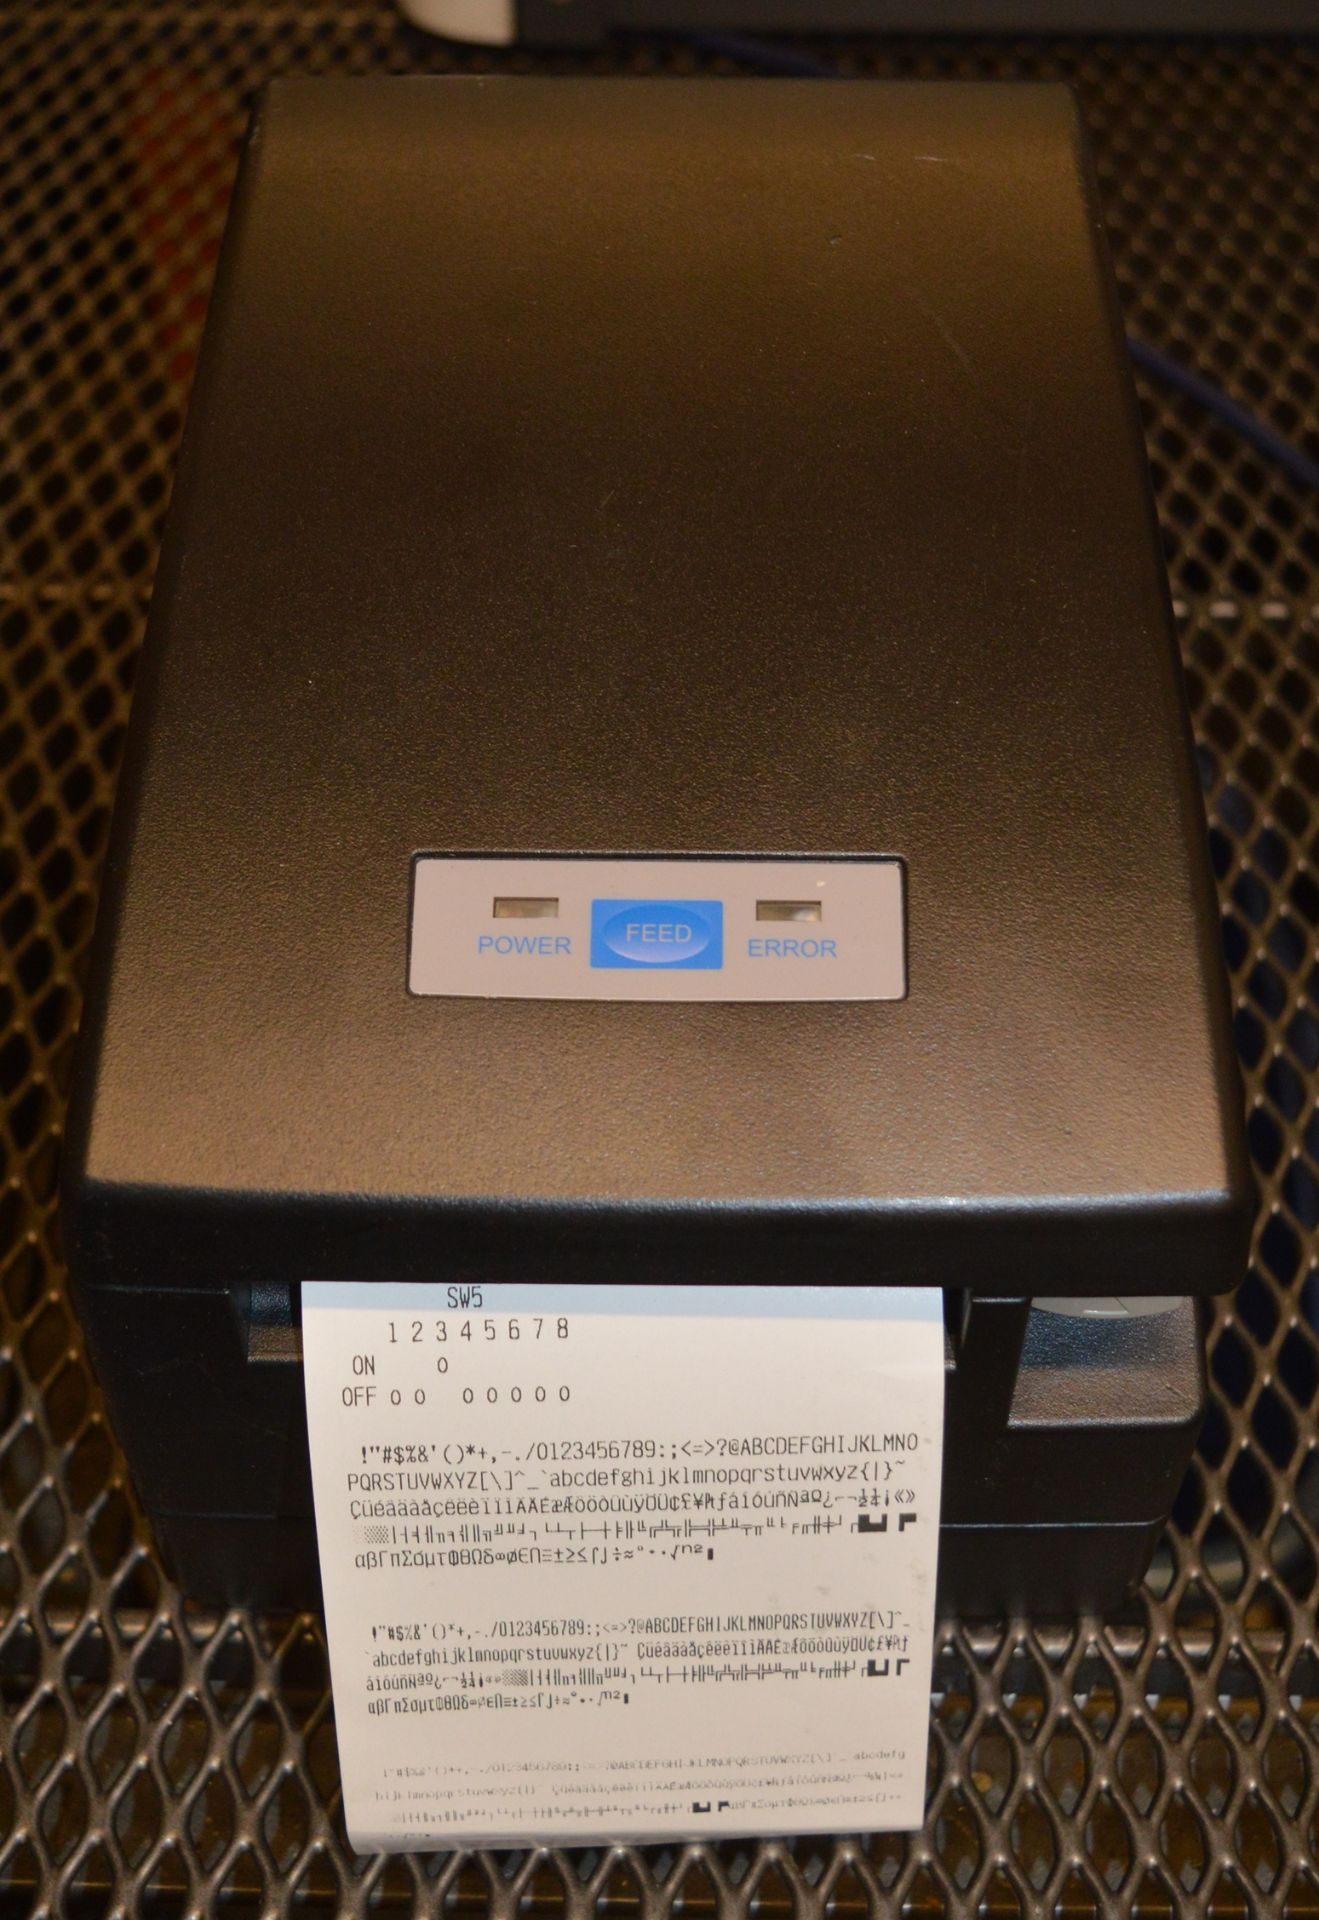 1 x Citizen CT-S2000 Thermal Receipt EPOS Printer - High Speed USB Printer - With Test Print - Two - Image 2 of 5